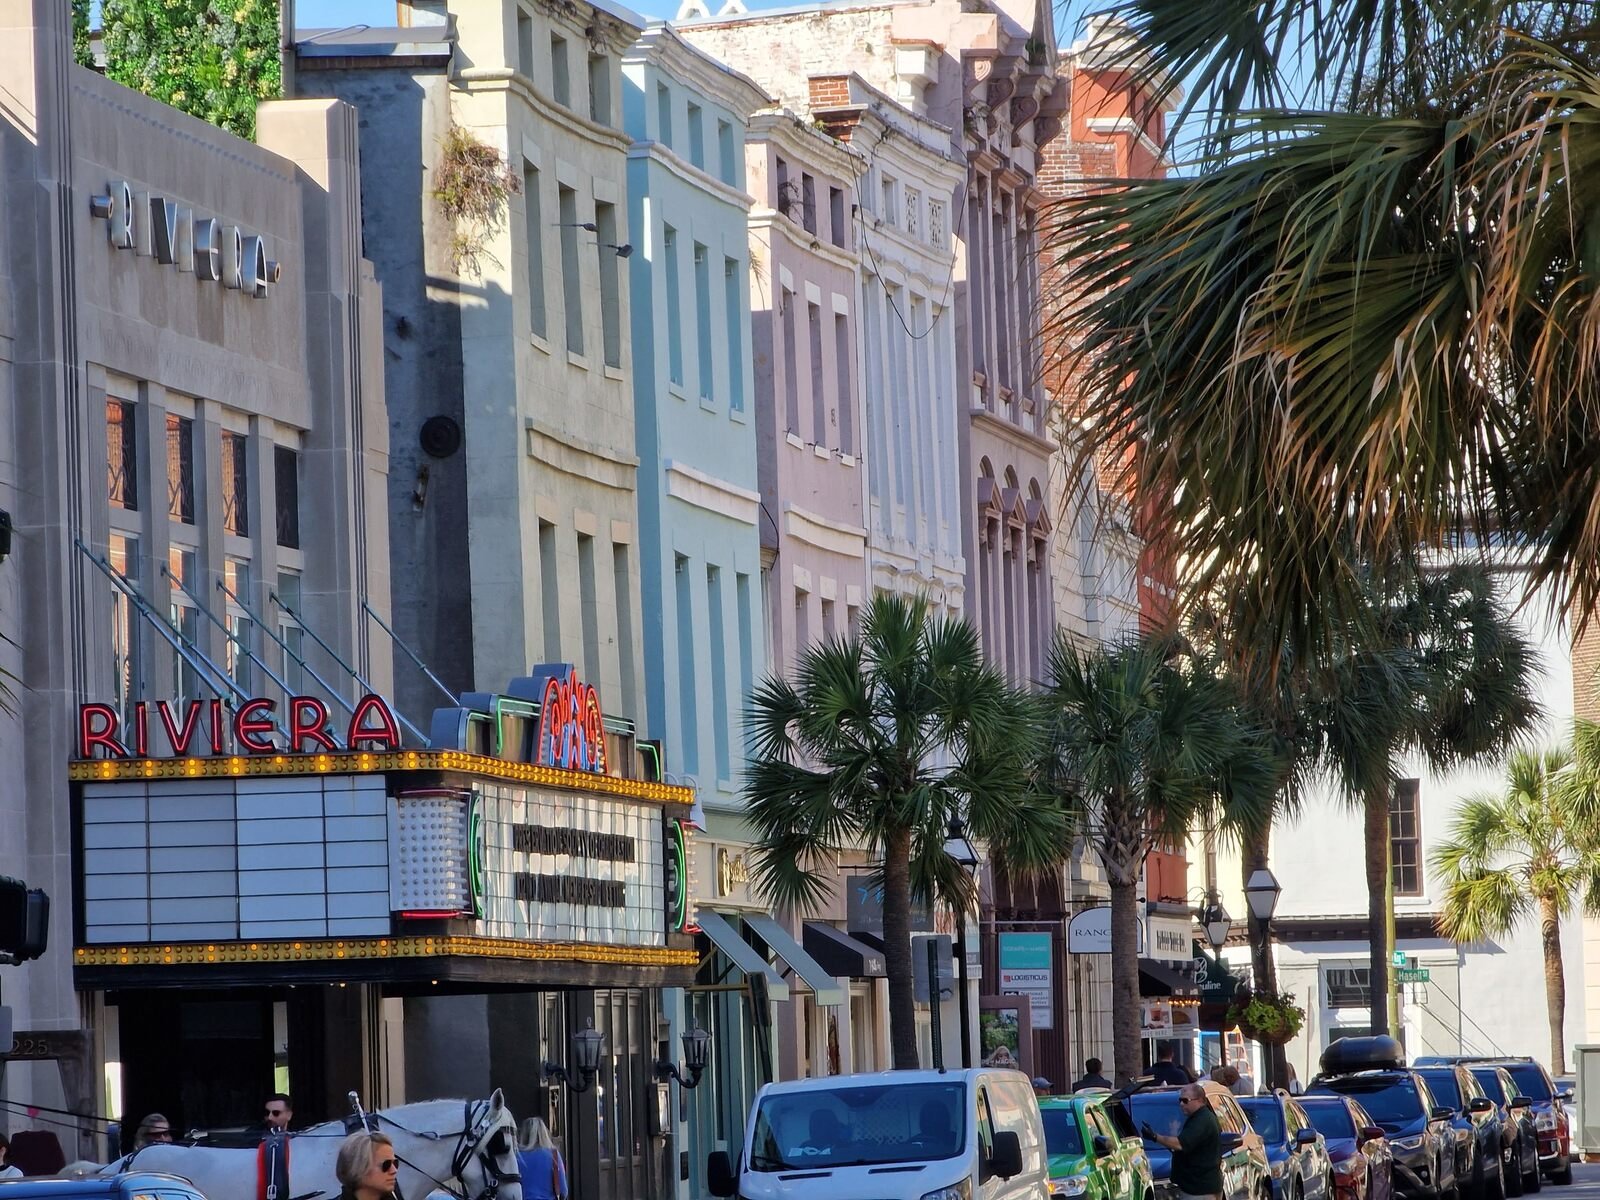 pastel coloured buildings with a vintage style theatre and palm trees lining the street